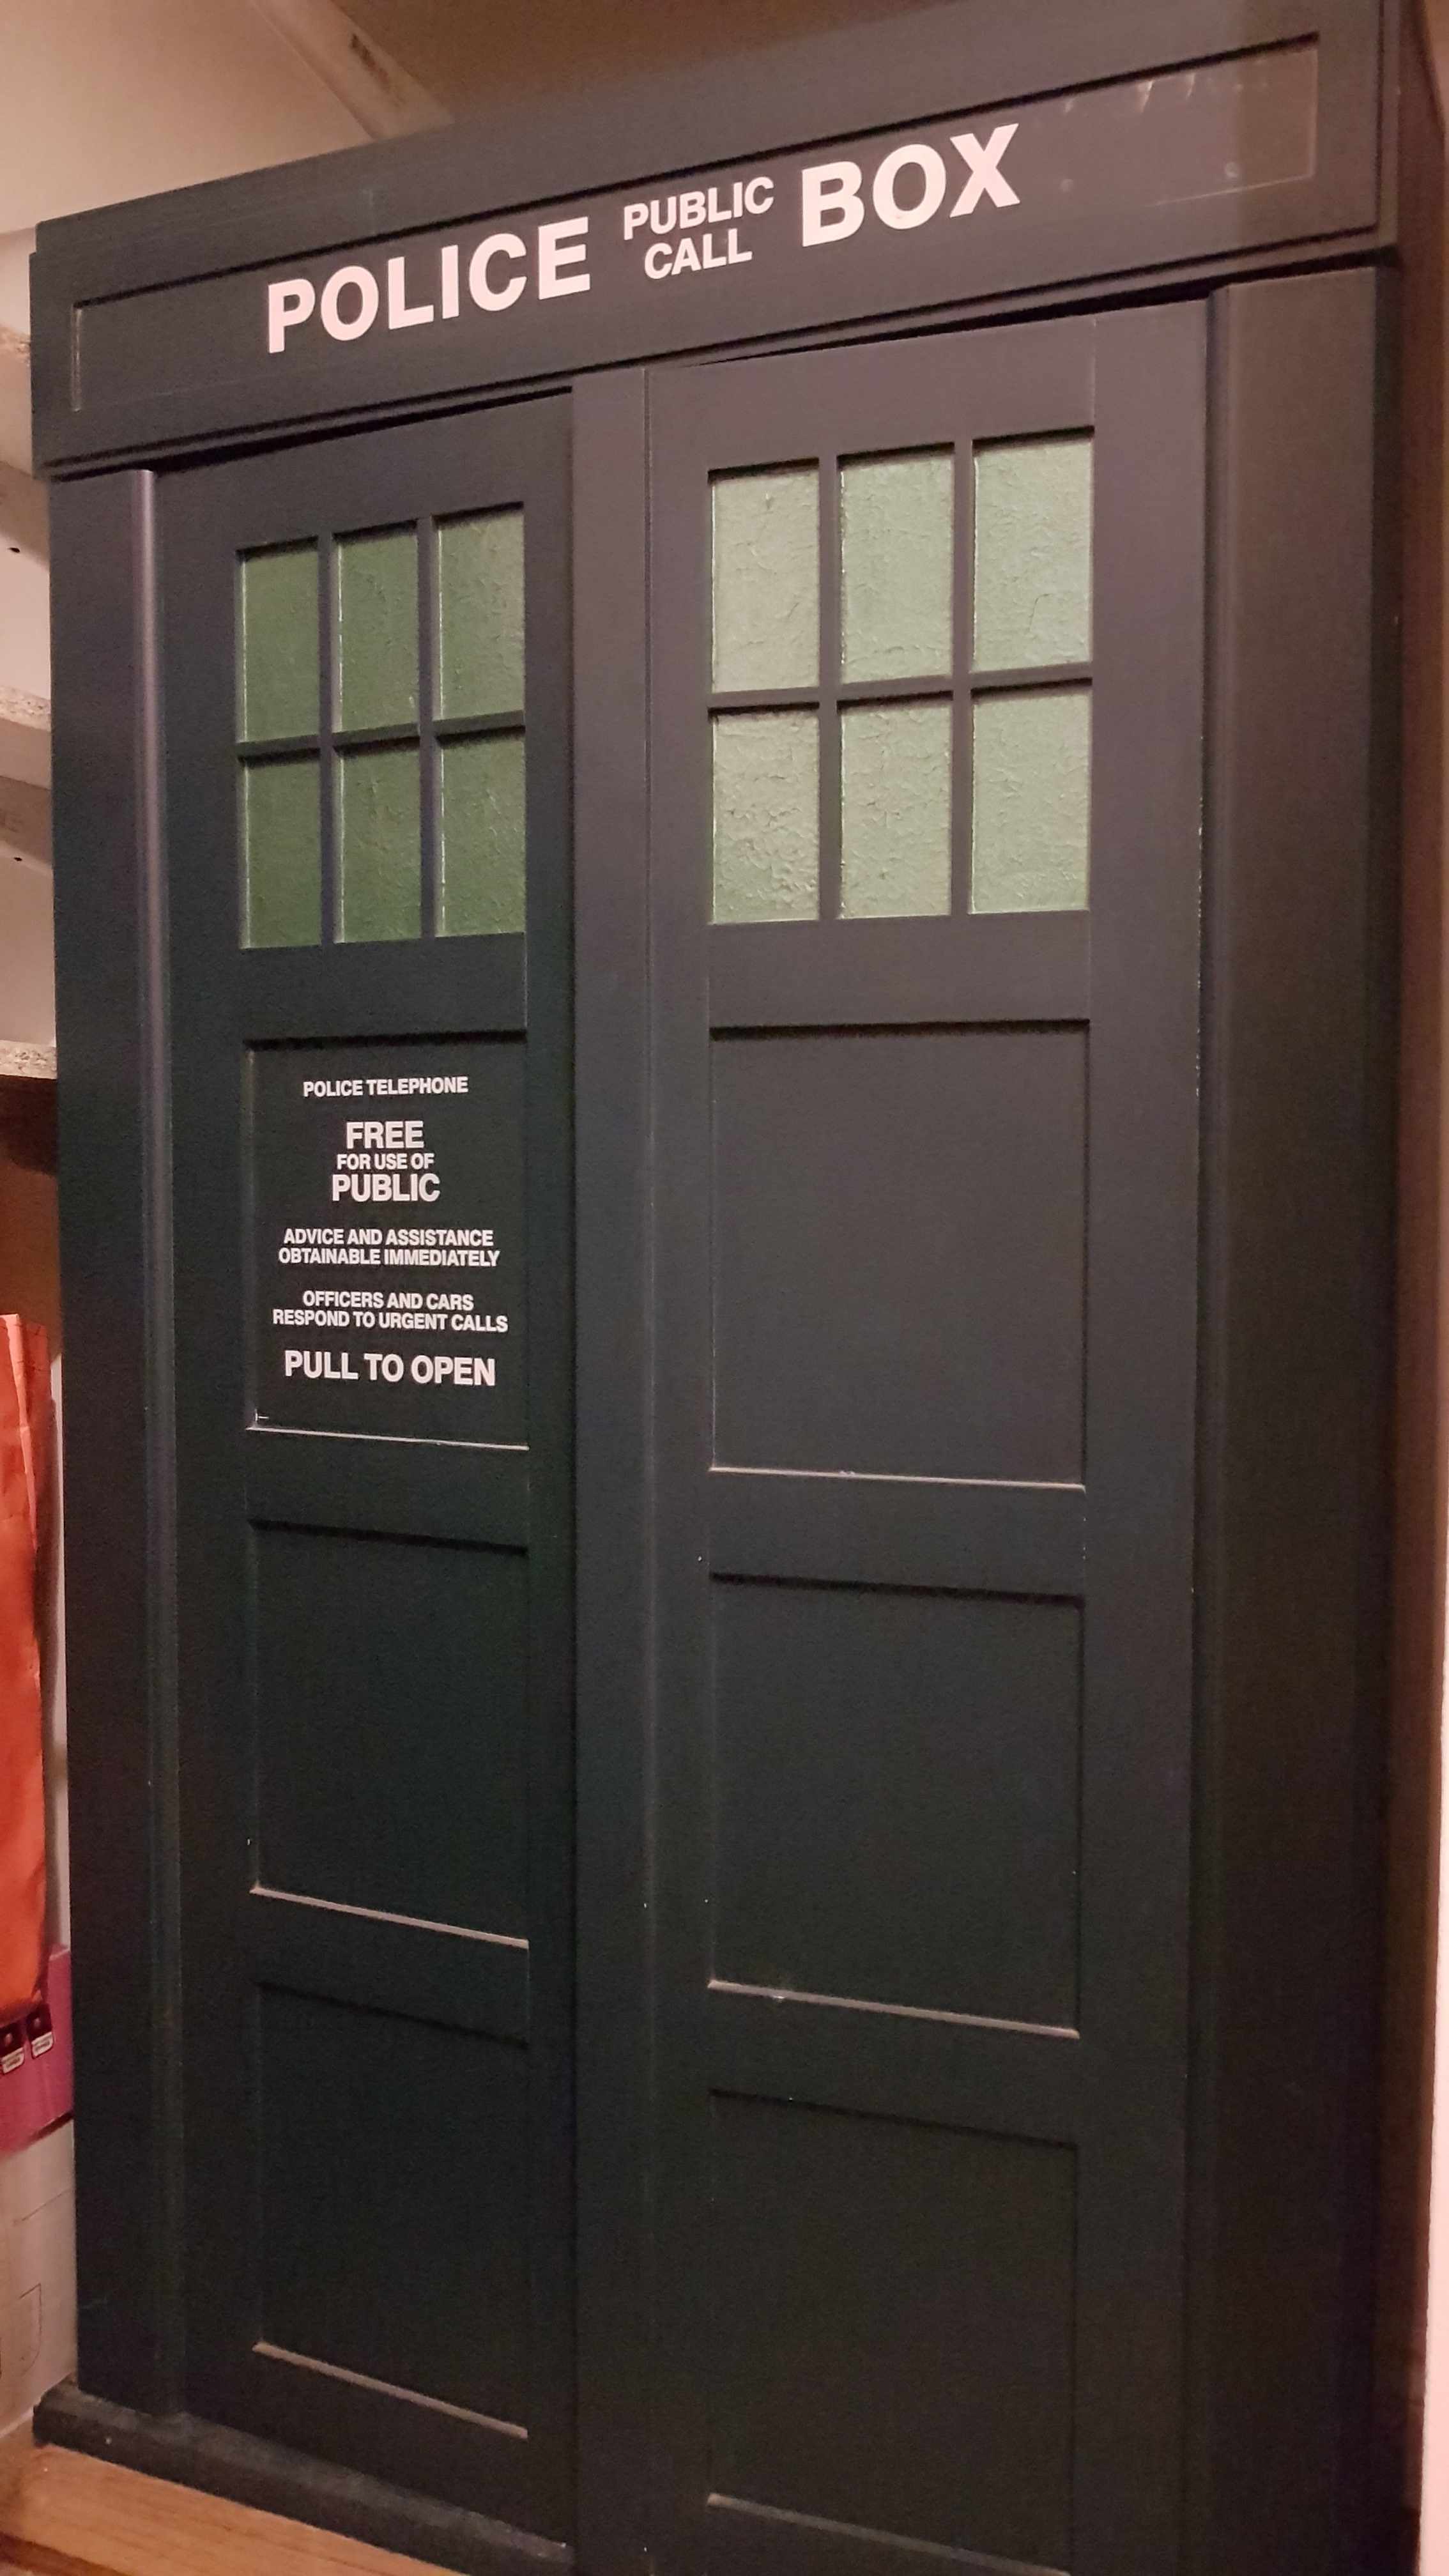 Picture of DW-VC Doctor Who - Video cabinet by artist Unknown from the BBC records and Tapes library